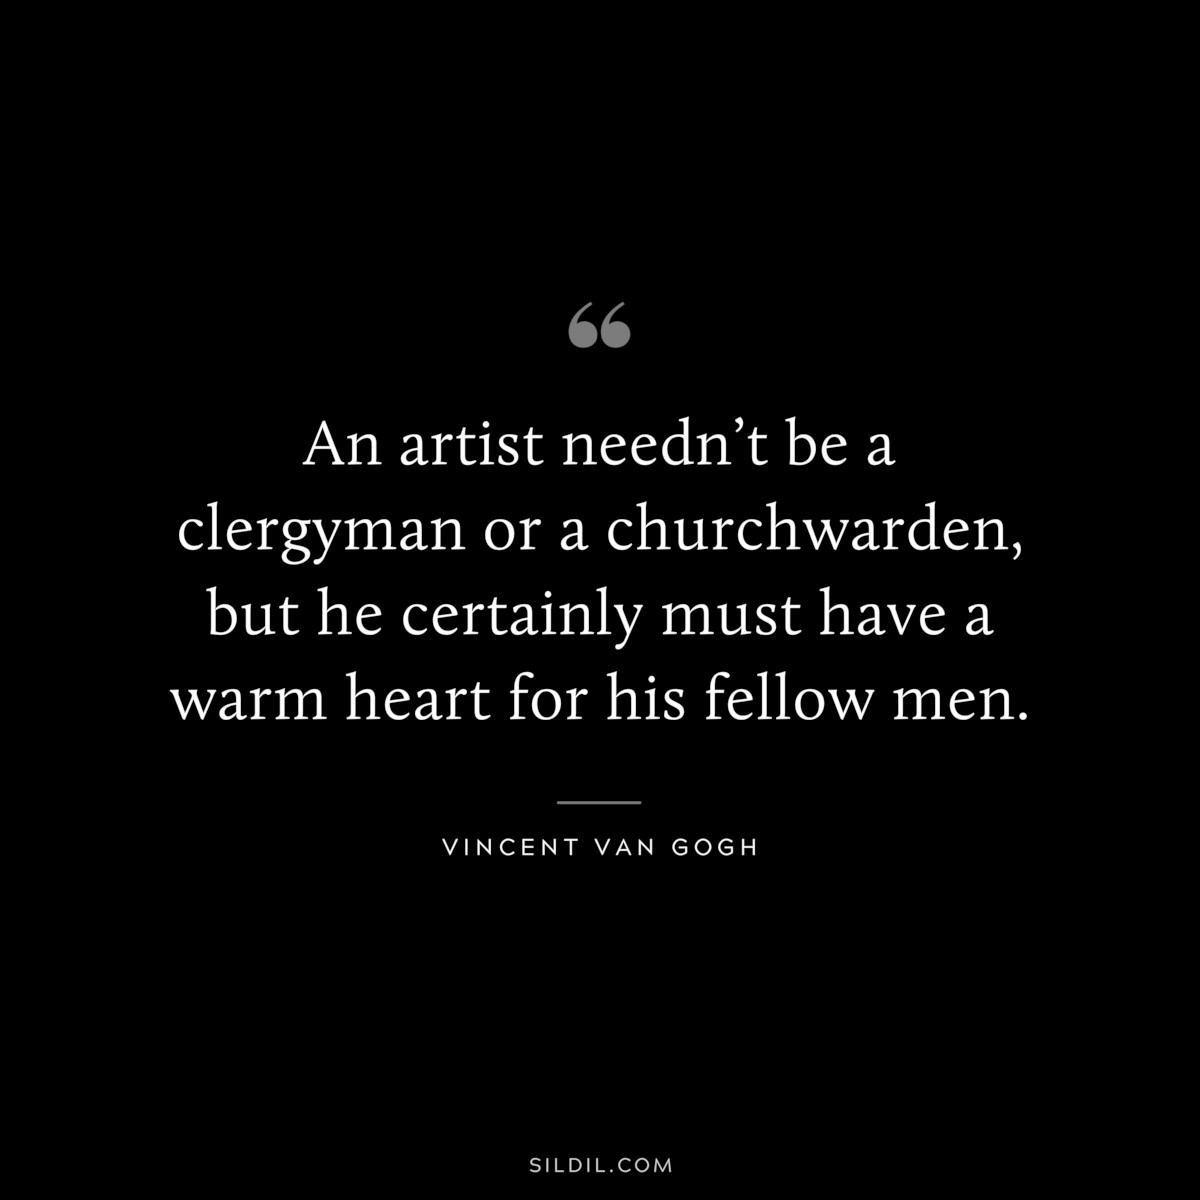 An artist needn’t be a clergyman or a churchwarden, but he certainly must have a warm heart for his fellow men. ― Vincent van Gogh